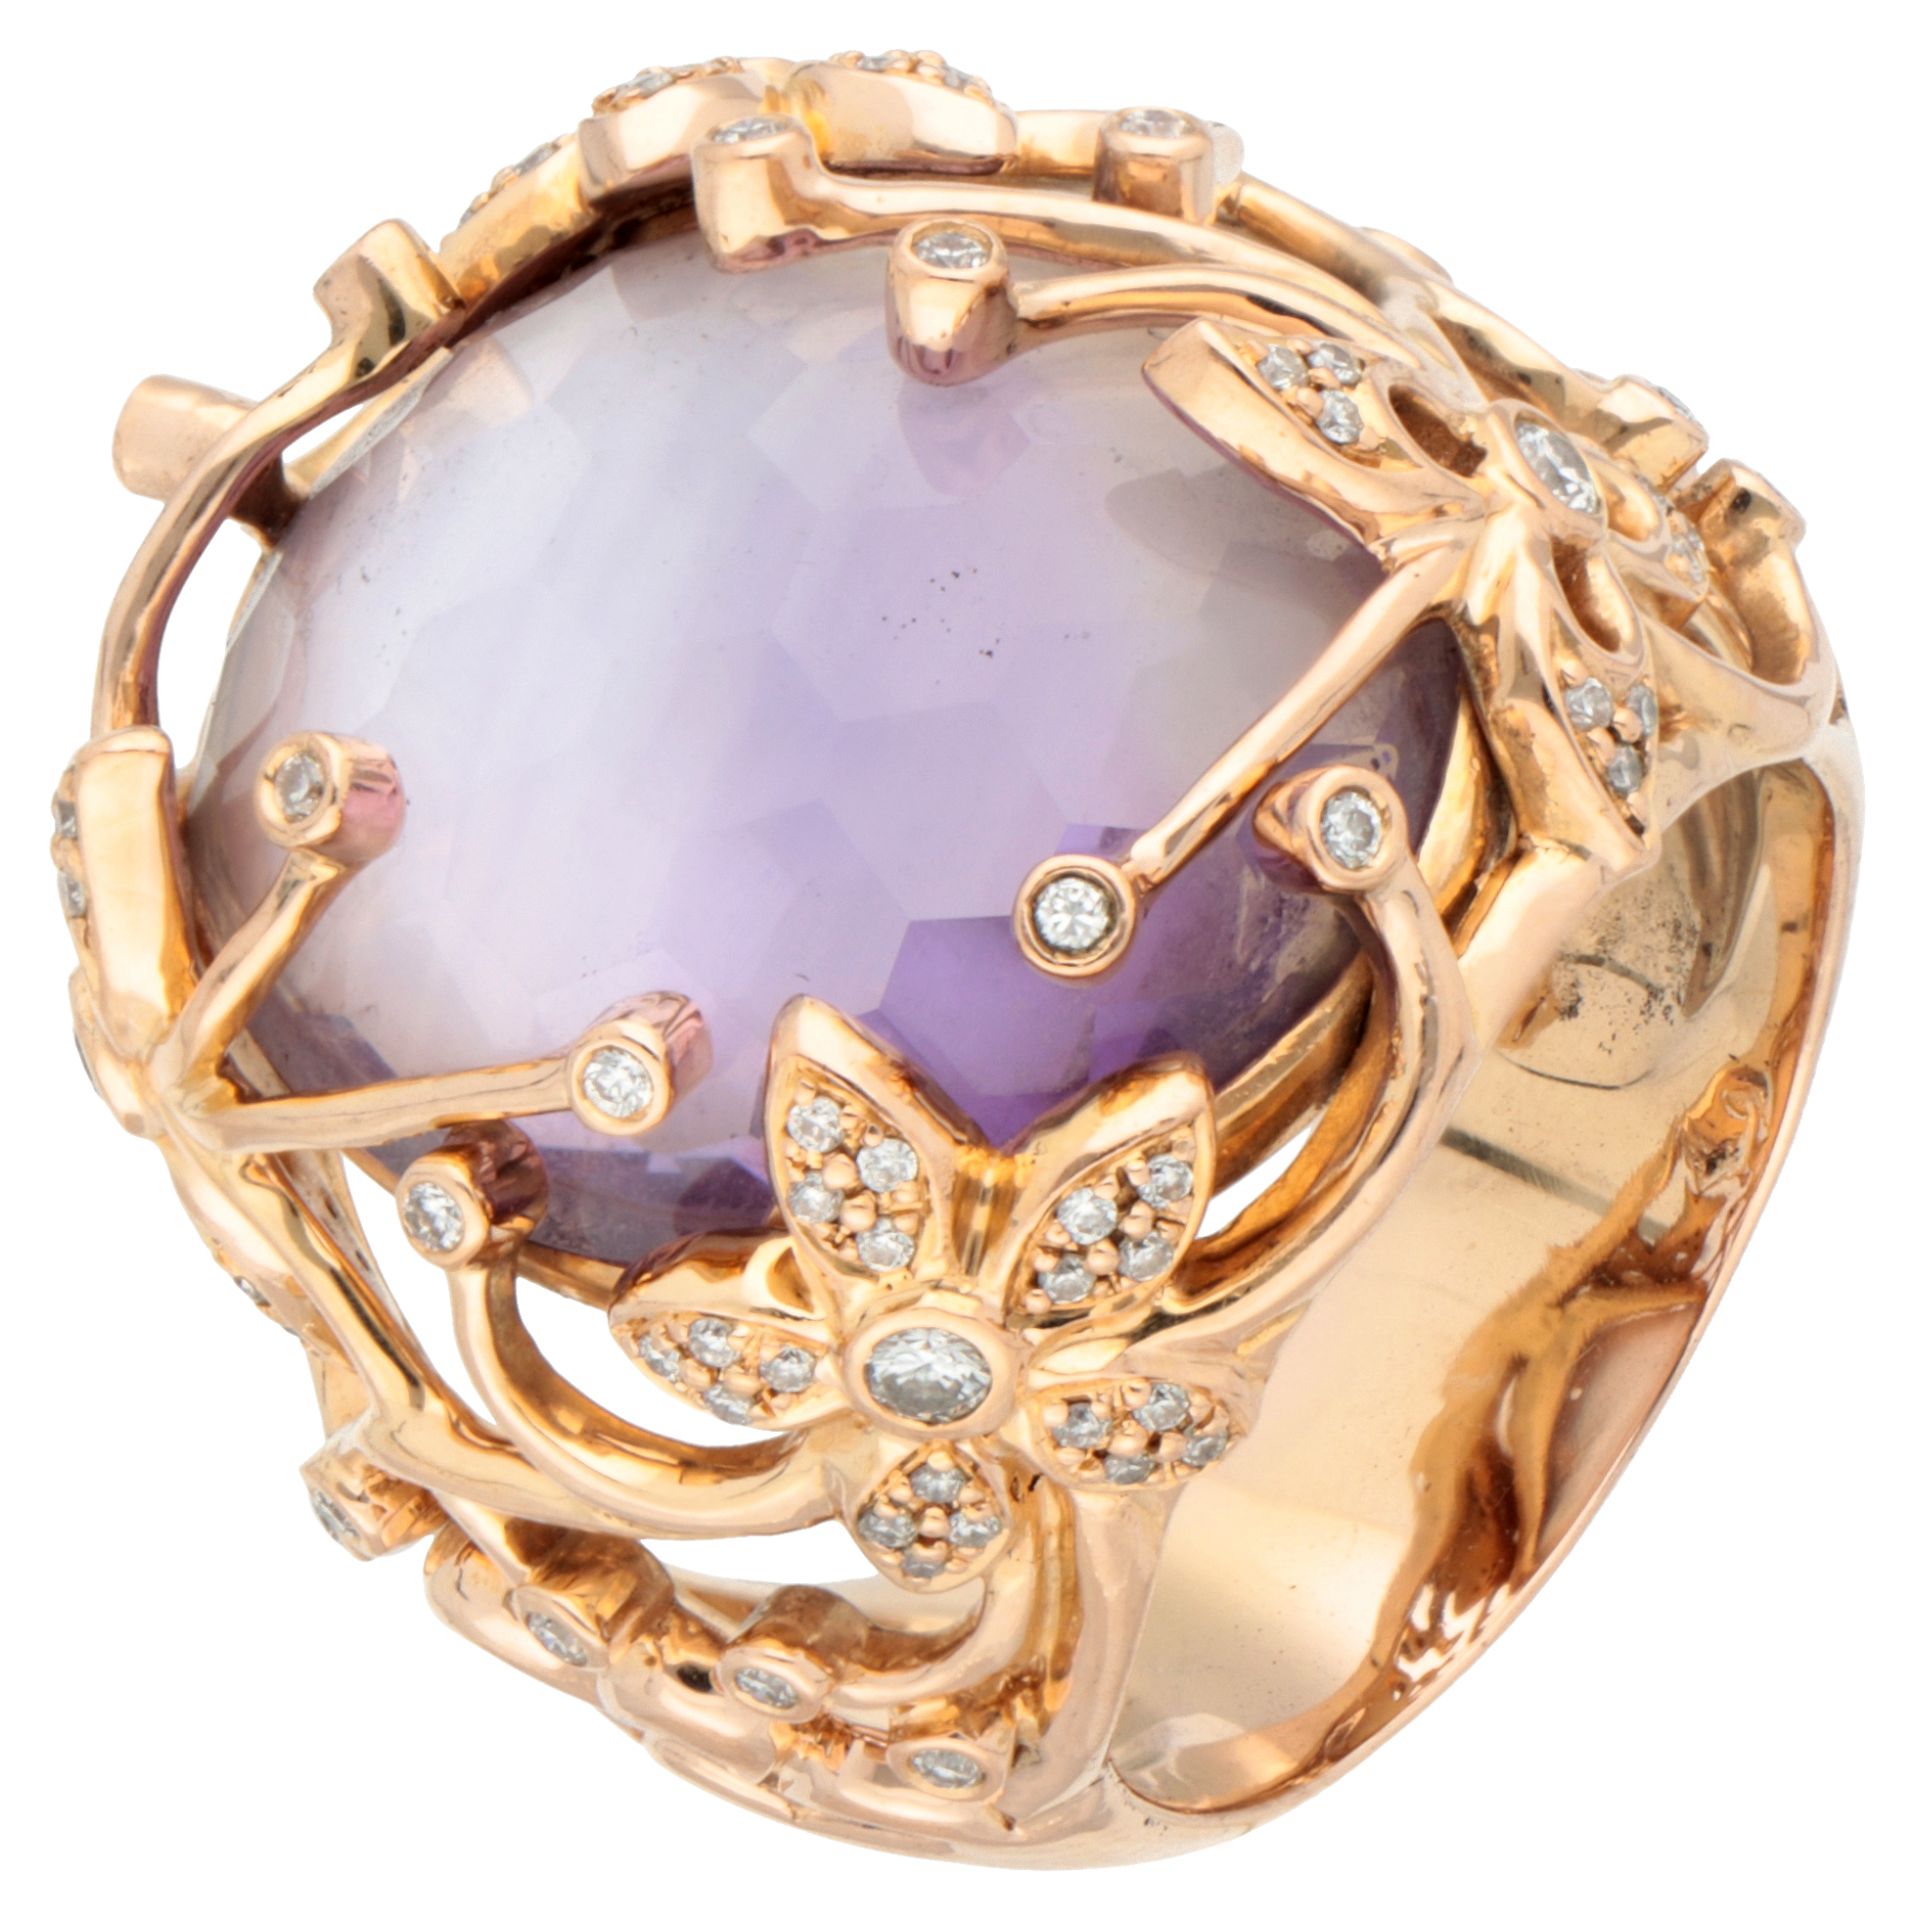 18K Gold design ring with topaz on mother-of-pearl and diamond.